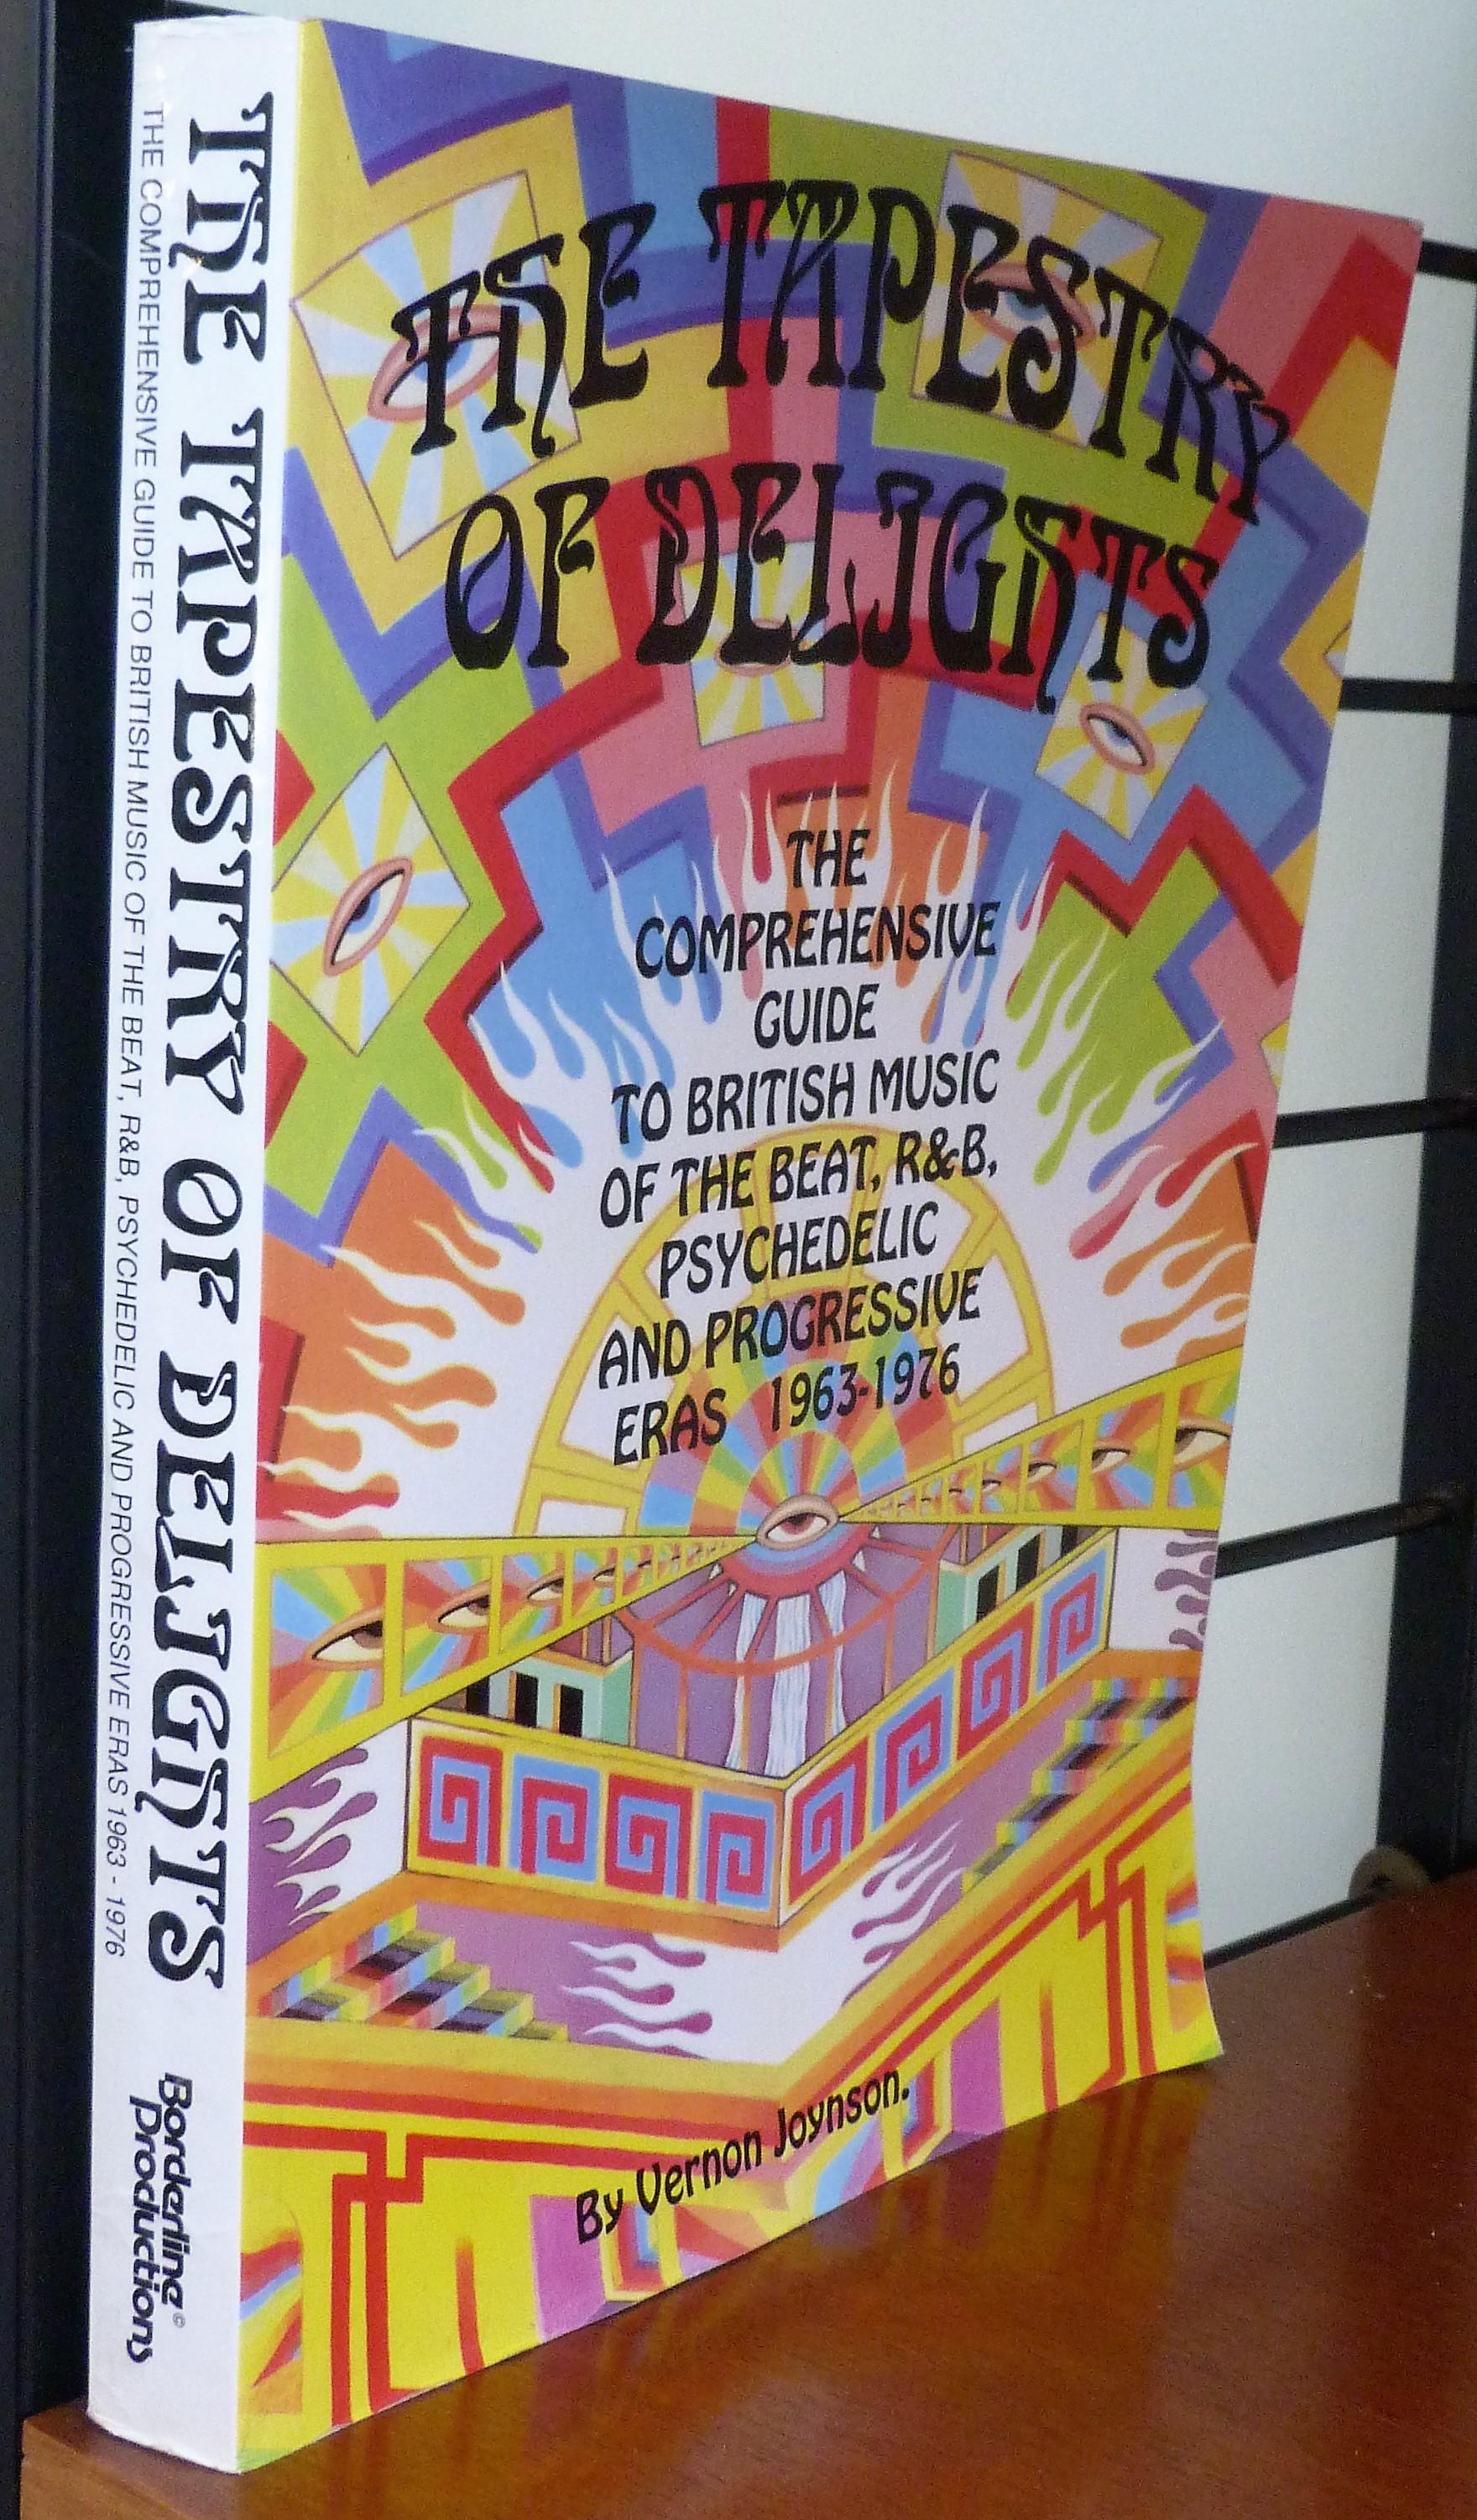 The Tapestry of Delights. The Comprehensive Guide to British Music of the Beat, R&B, Psychedelic and Progressive Eras 1963-1976 - Joynson, Vernon